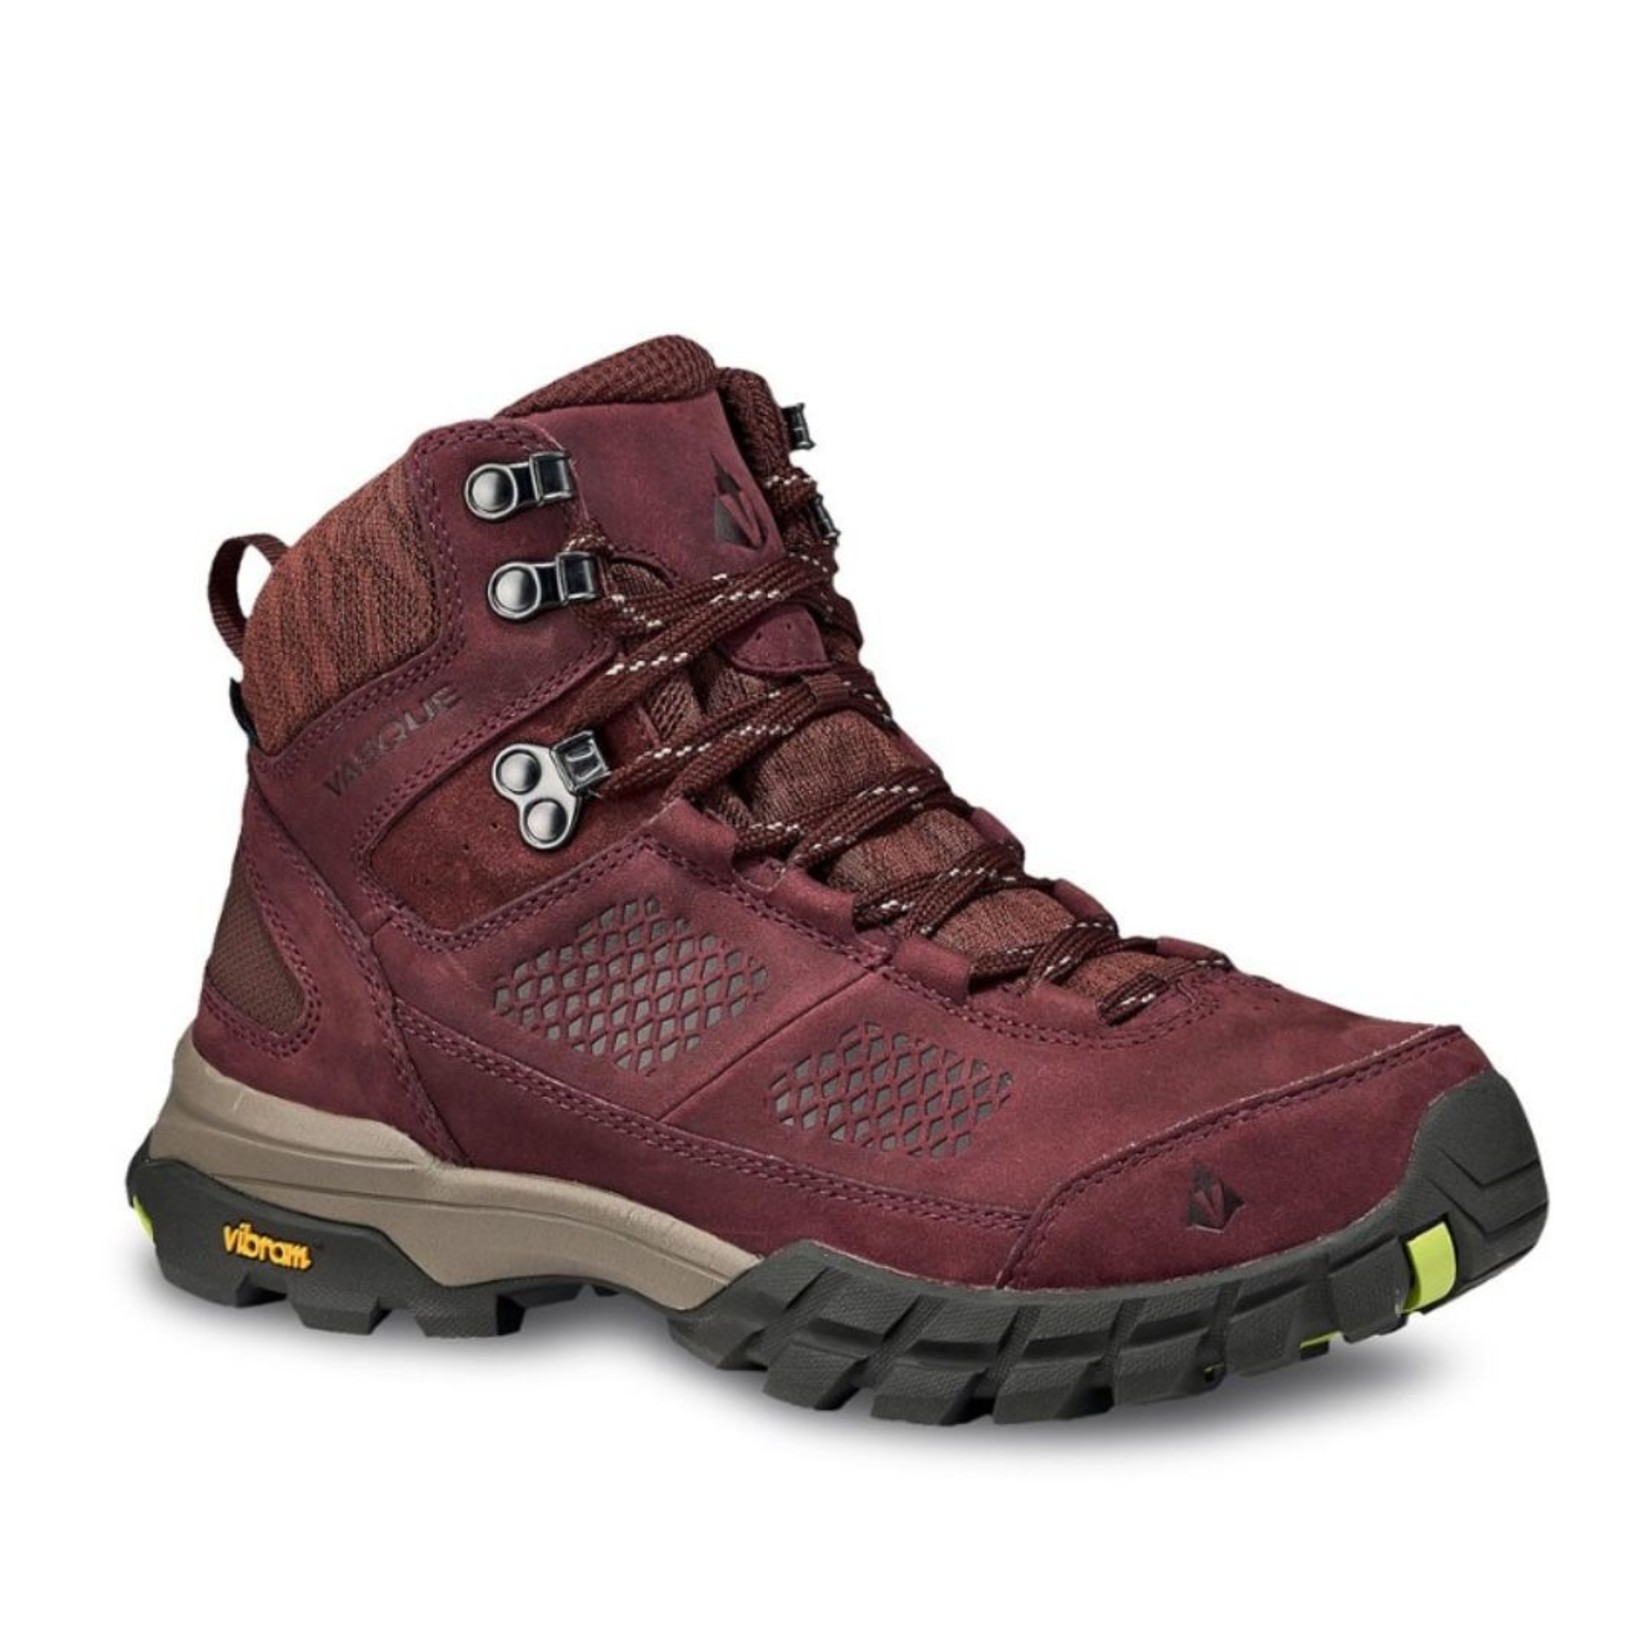 Vasque 7385 Talus AT UltraDry Women’s Hiking Boots